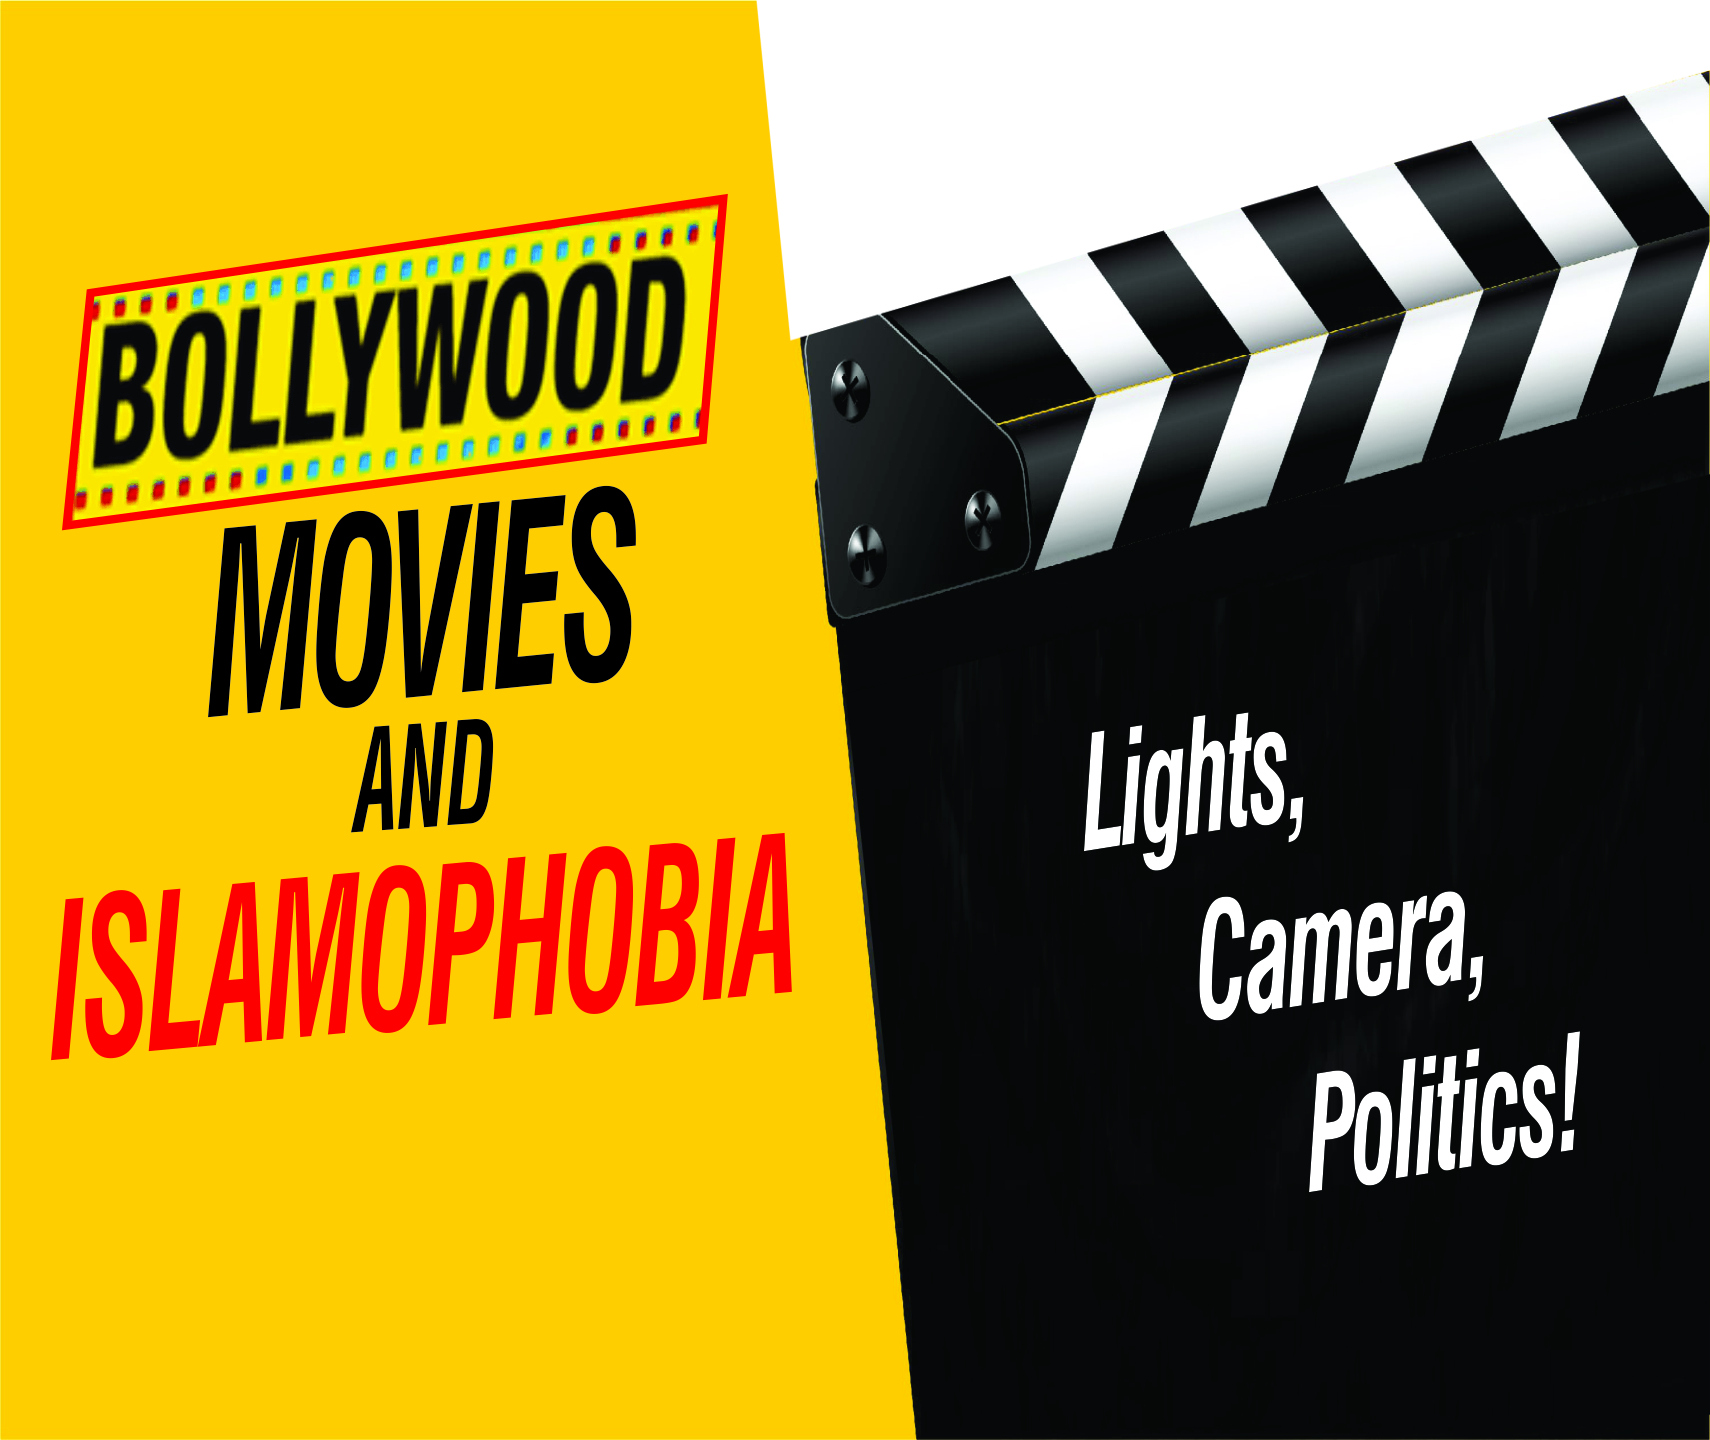 You are currently viewing Bollywood Movies and Islamophobia